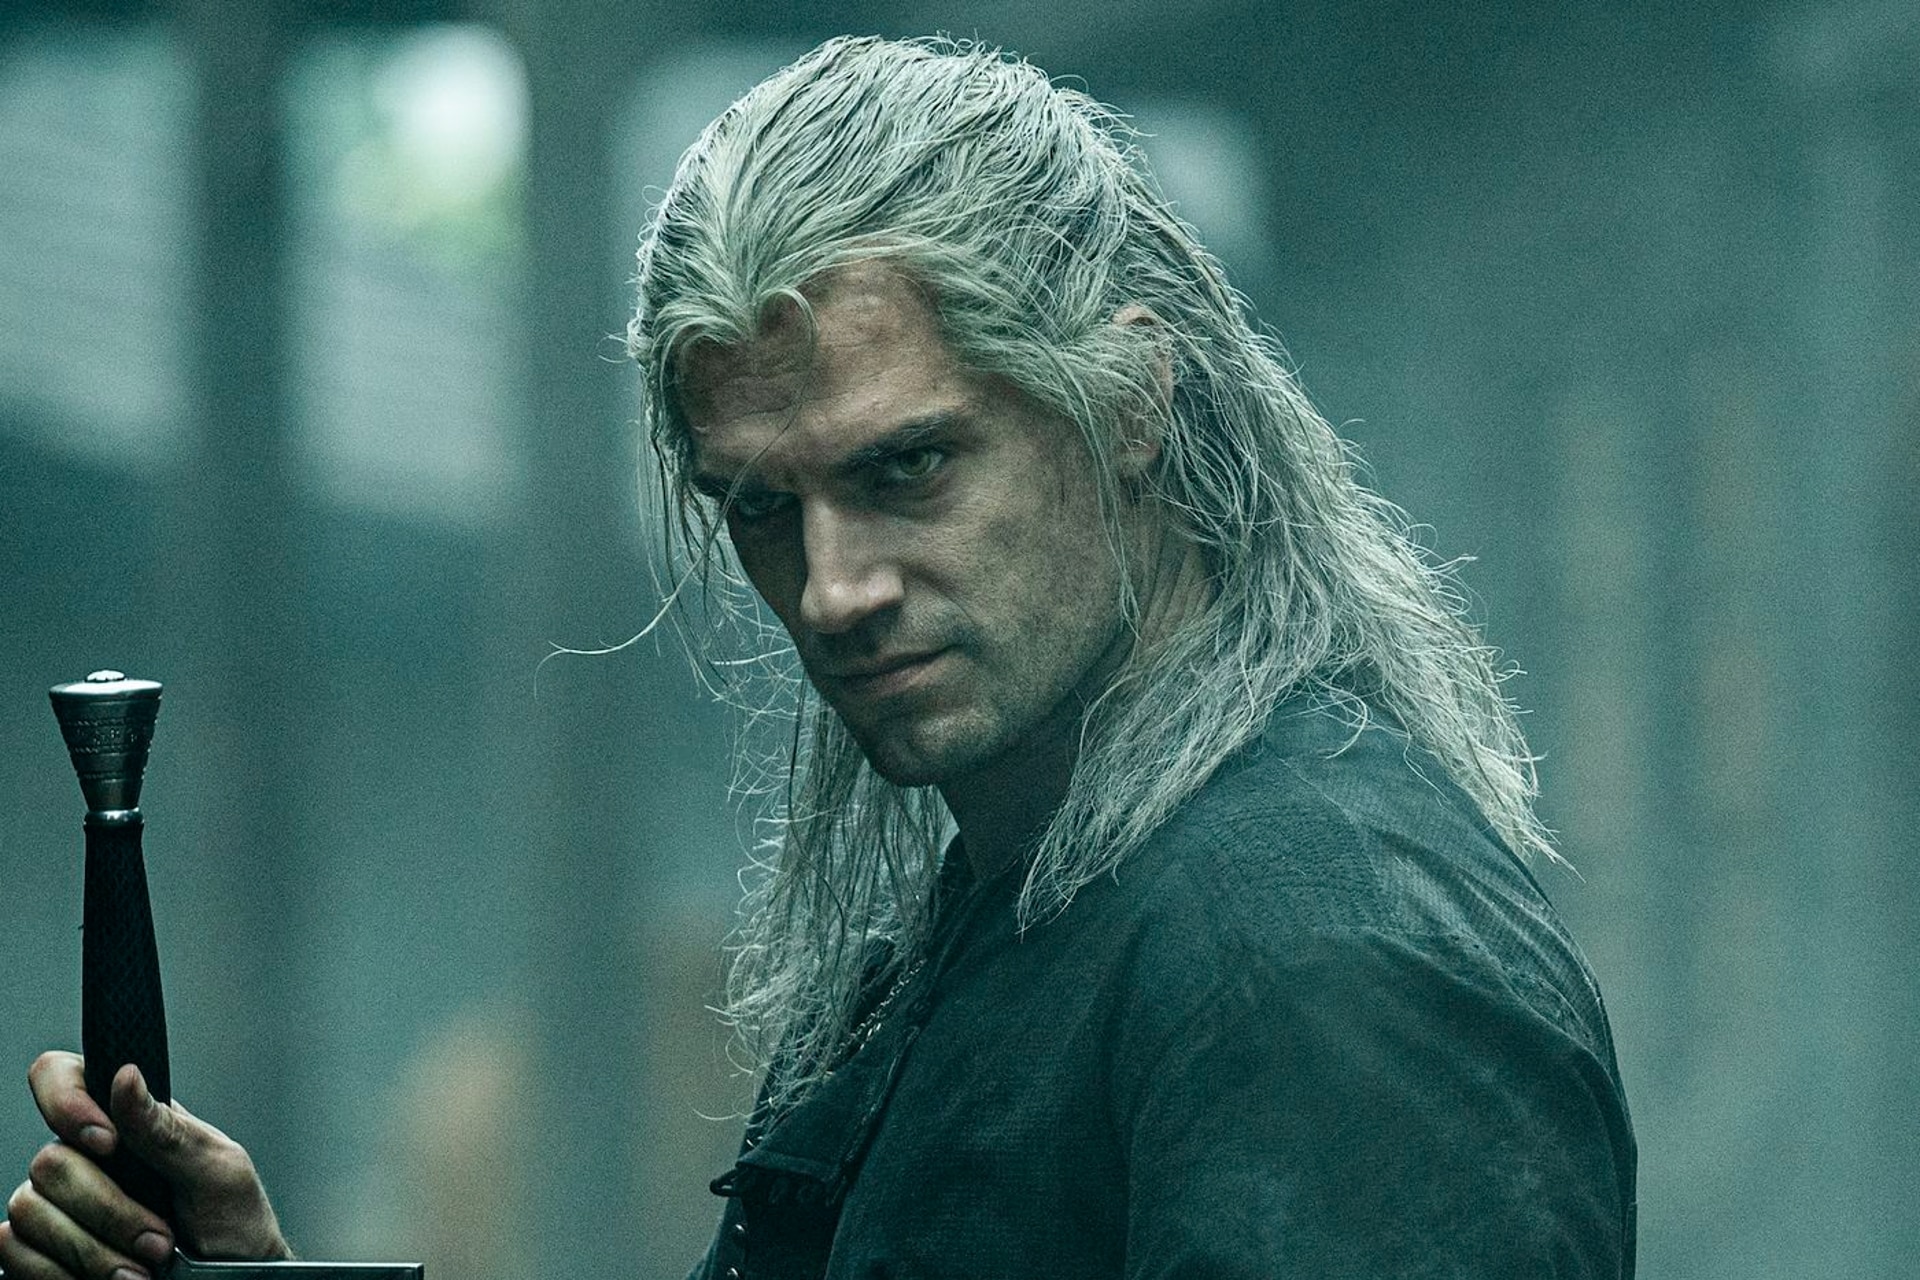 The Witcher season 3, Henry Cavill's last outing, will arrive this summer